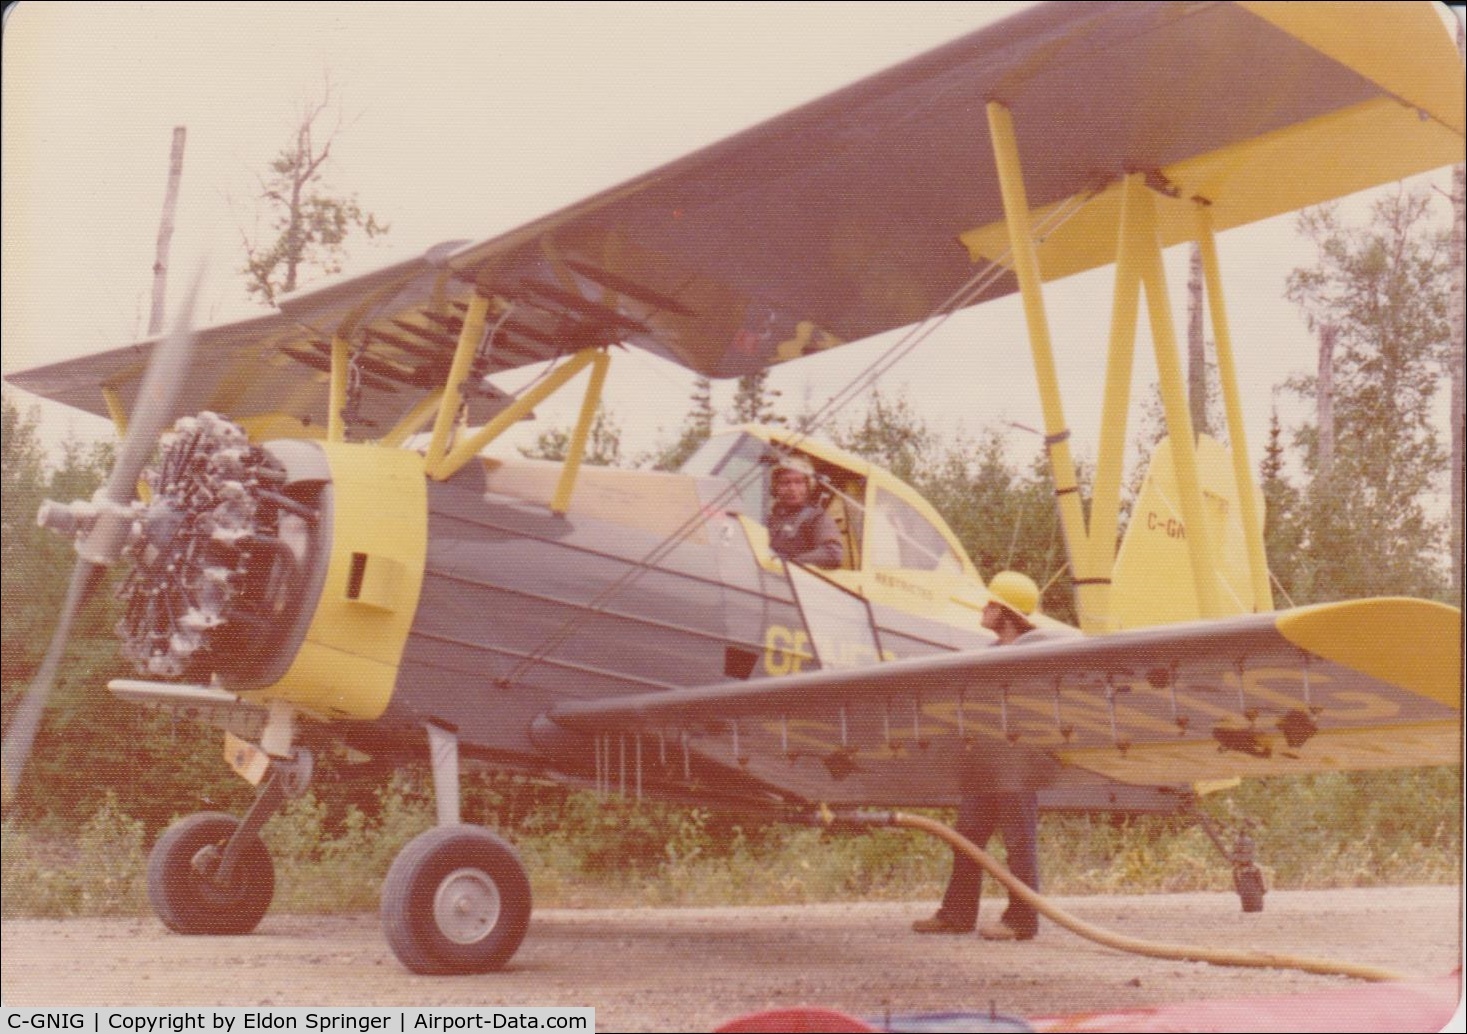 C-GNIG, 1974 Schweizer G-164A C/N 1408, Ontario Ministry of natural Resources, aerial spray operations, herbicide 2,4-D for tending forest plantations.  Pilot Rock Hodgins, General Airspray Limited, July 1975.